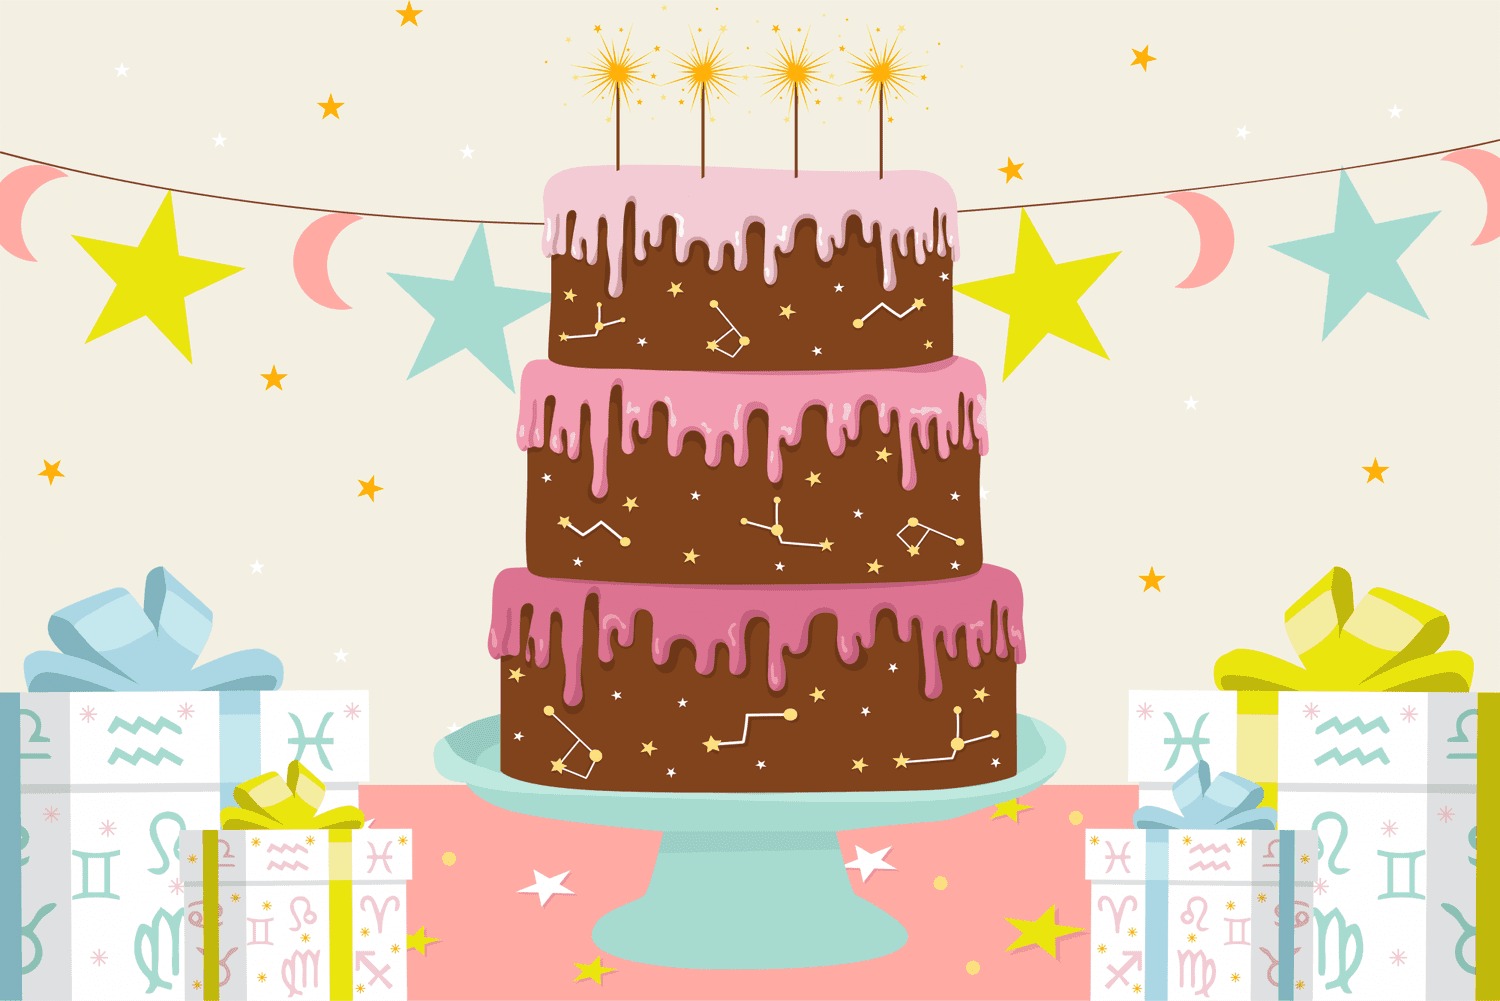 illustration of cake and presents with astrology symbols